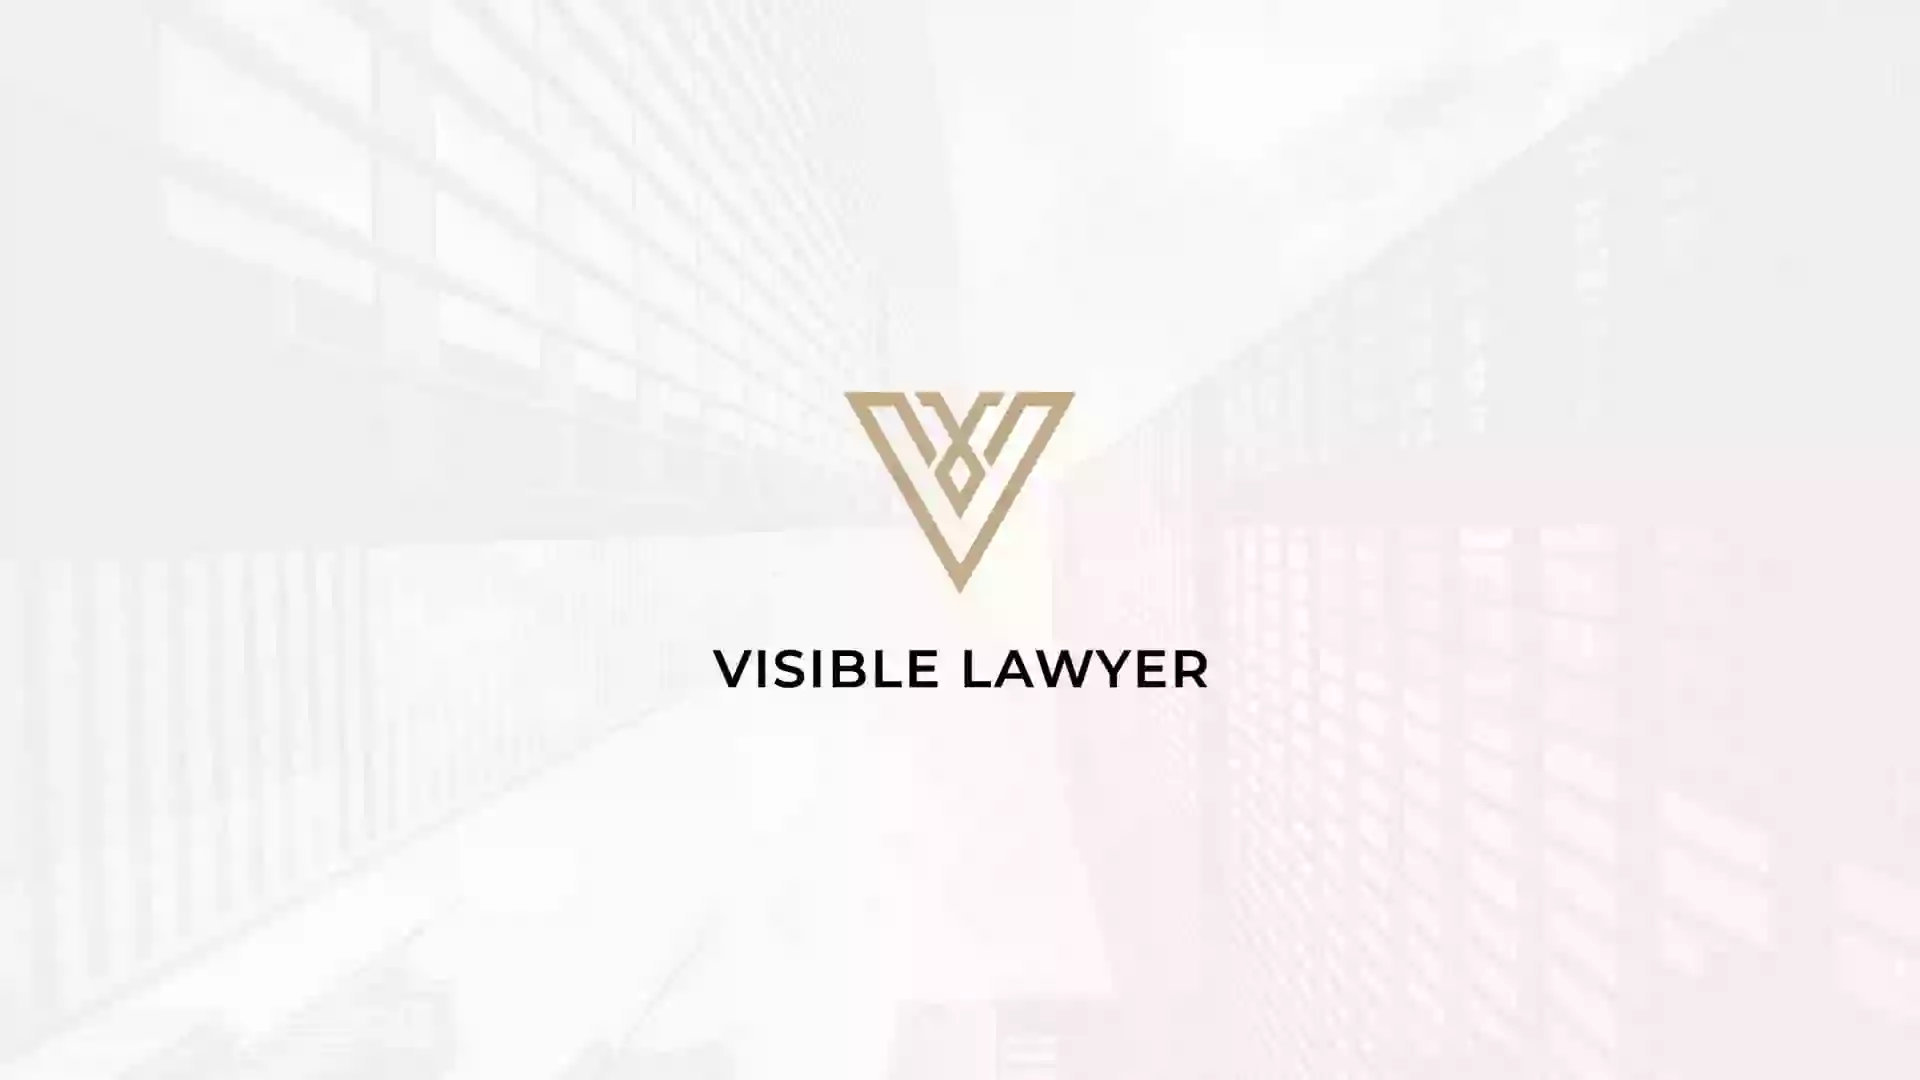 Visible Lawyer